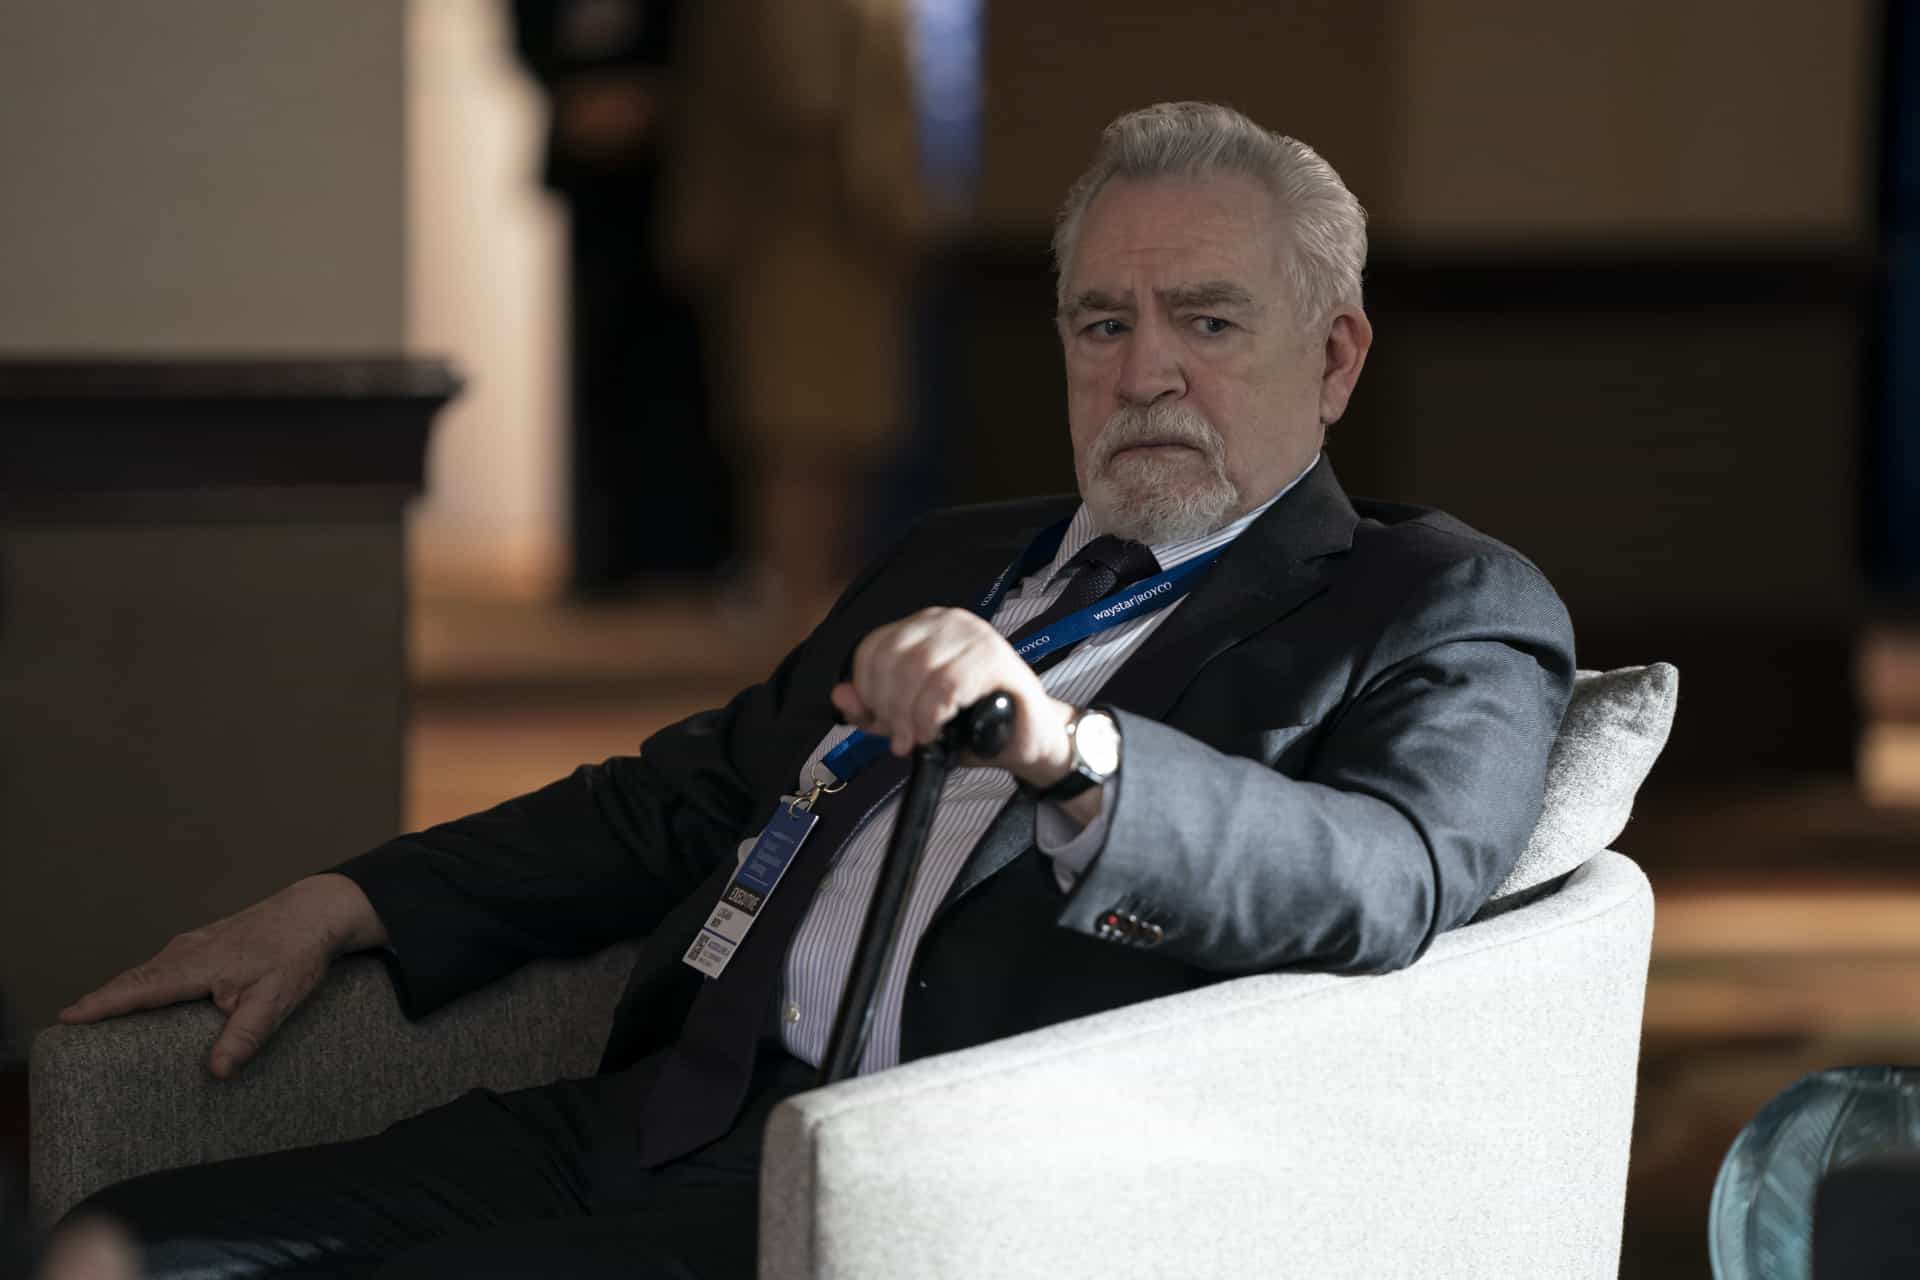 Logan in a suit and name badge looking worried in an armchair